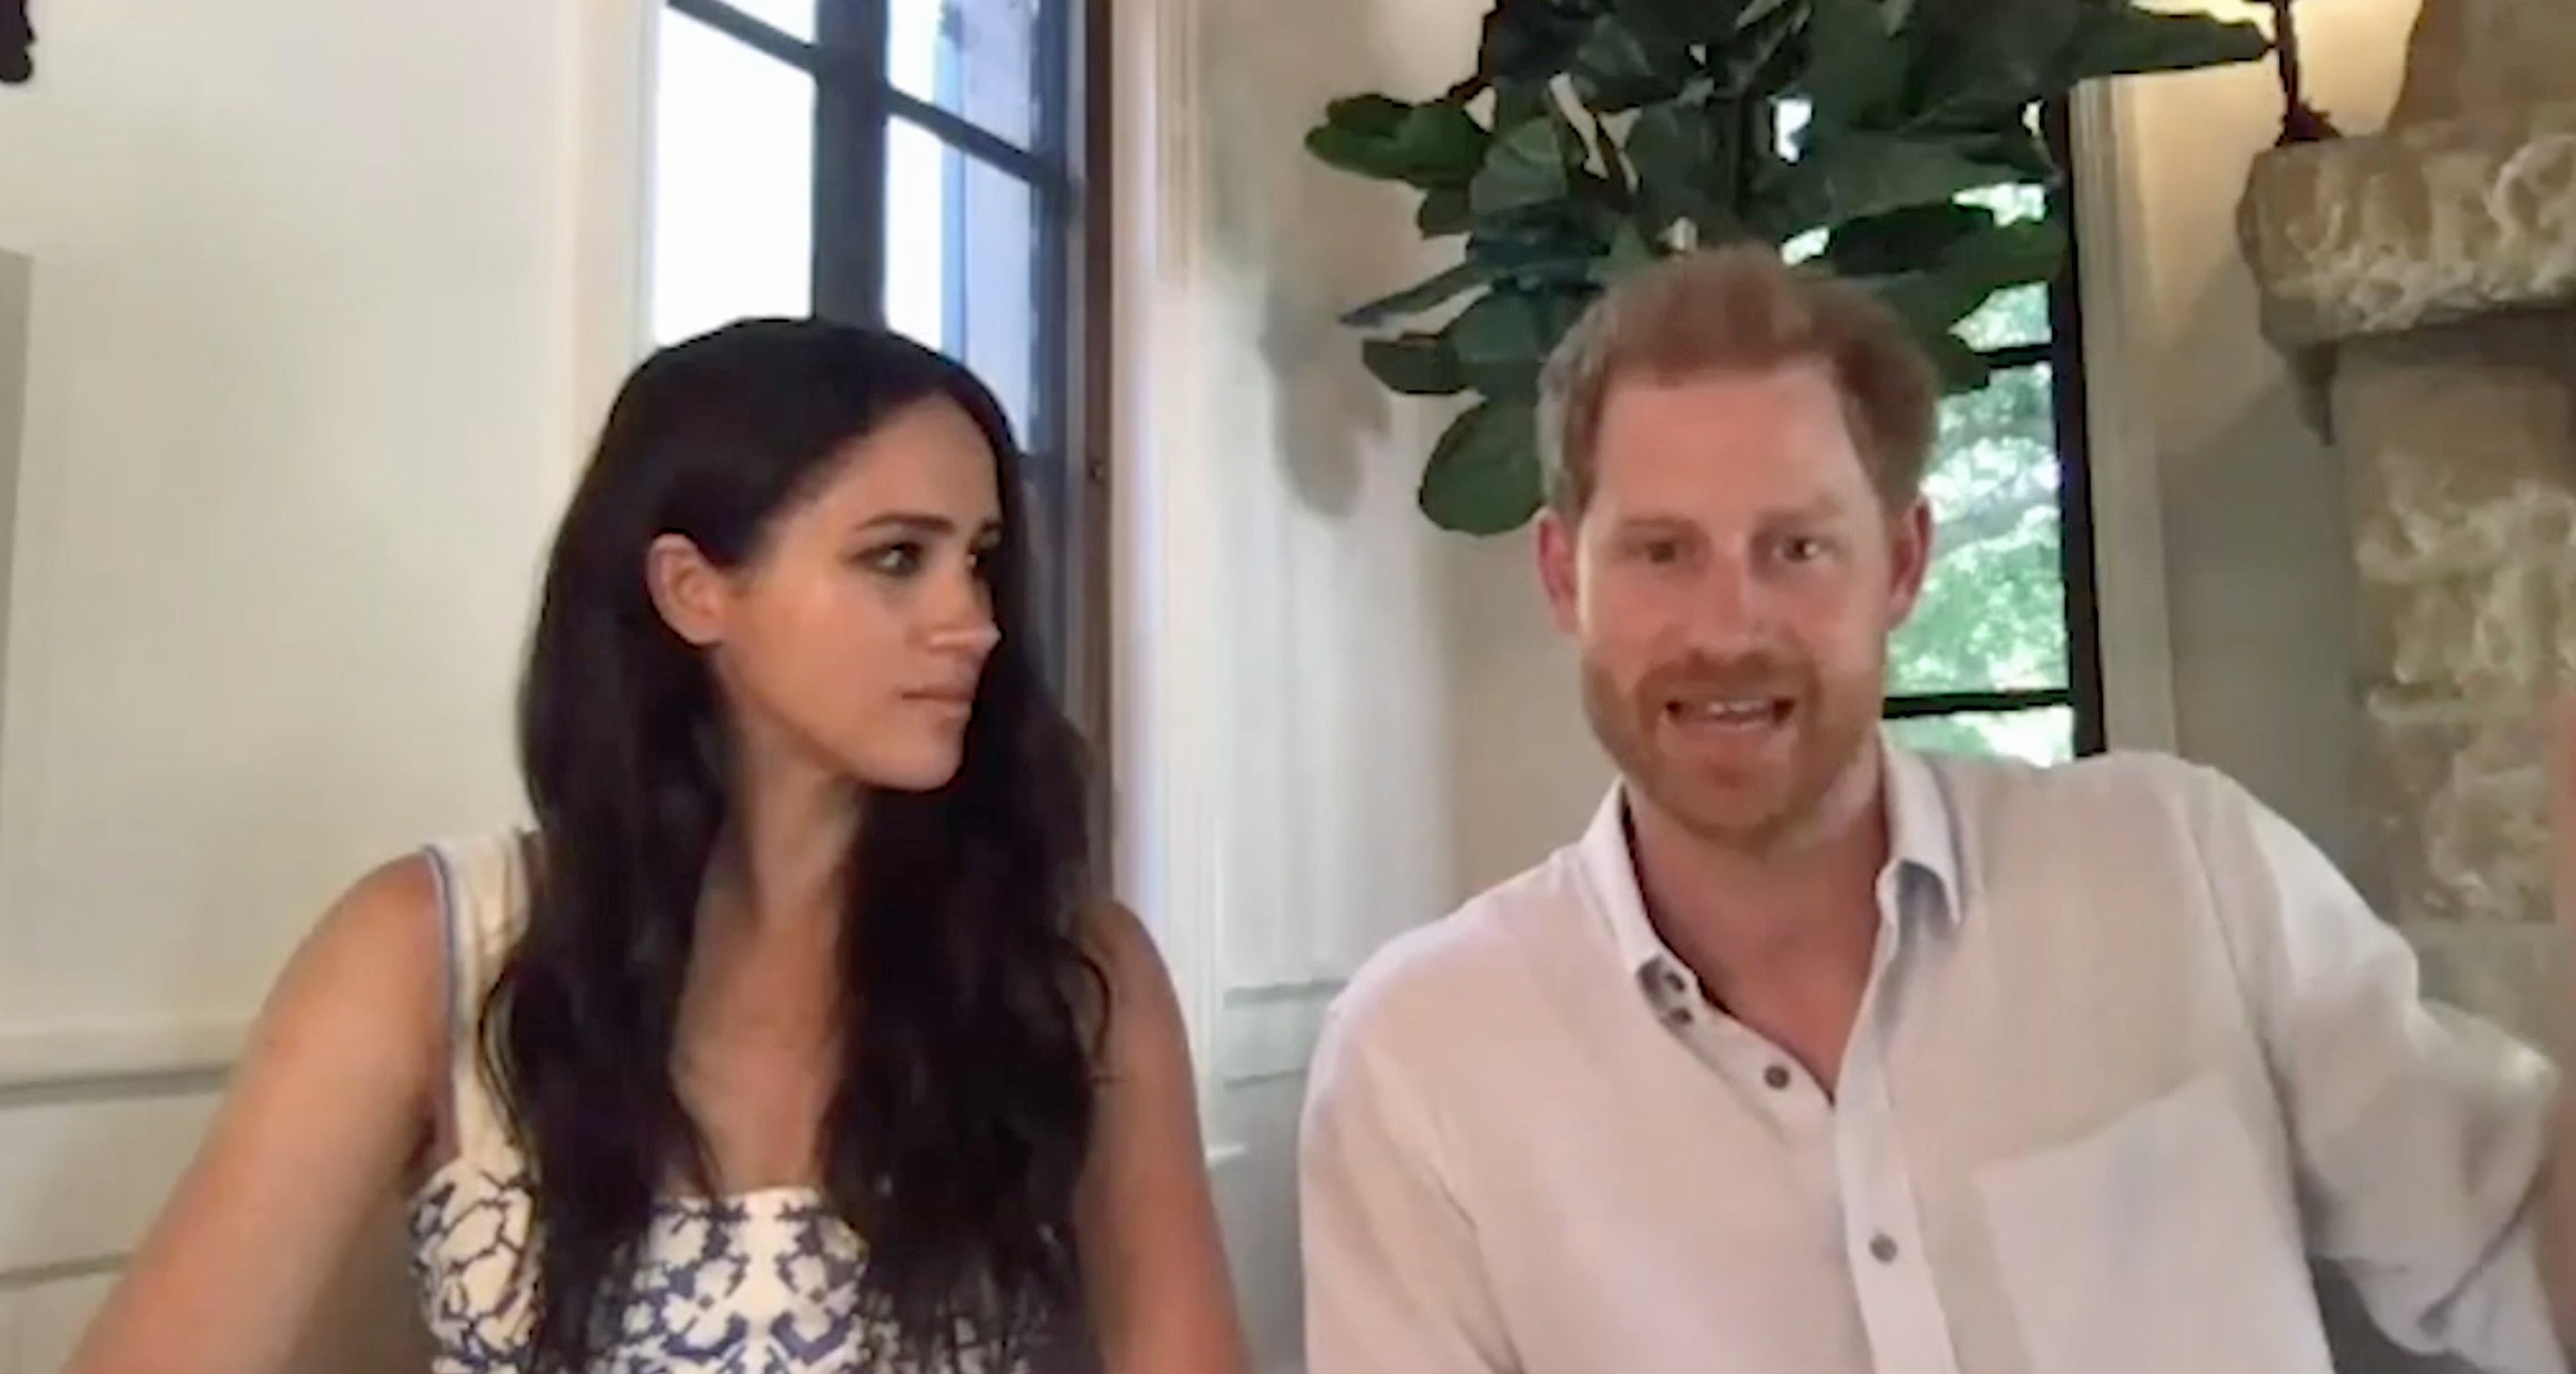 Ferrari Press Agency
Ref 12075
Sussex  1
20/08/2020
See Ferrari text
Pictures MUST credit: Queen’s Commonwealth Trust

Meghan Markle joined husband Prince Harry in a video broadcast from their new home in California for a conference about the British Commonwealth organisation.Former actress Meghan admitted she didn't know about it  until she joined the Royal Family.She said it was an honour to be continuing Queen Elizabeth’s  legacy during a video call with young leaders from the Queen's Commonwealth Trust.The Duke, 35, and Duchess of Sussex, 39,  joined the discussion from their new  million mansion in Santa Barbara, California, on Monday, with a video of the call shared by the trust  today.     Prince Harry and Meghan the Duke and Duchess of Sussex,  spoke adoringly of the Queen, 94, whom they referred to as grandmother during the video call.It comes  weeks after their rift with the Royal Family was laid bare in their biography Finding Freedom.Their loving comments come after the couple faced criticism for their last conversation with the group, in which they appeared to take a swipe at the British Empire by saying the history of the Commonwealth “must be acknowledged” even if it's '”uncomfortable”The commonwealth is an organisation made up of mostly former colonies of the British empire.

OPS: Prince Harry and Meghan Markle in their video conference from California for the Queen’s Commonwealth Trust

Picture supplied by Ferrari,Image: 554004997, License: Rights-managed, Restrictions: , Model Release: no, Credit line: Queen’s Commonwealth Trust / Ferrari / Profimedia